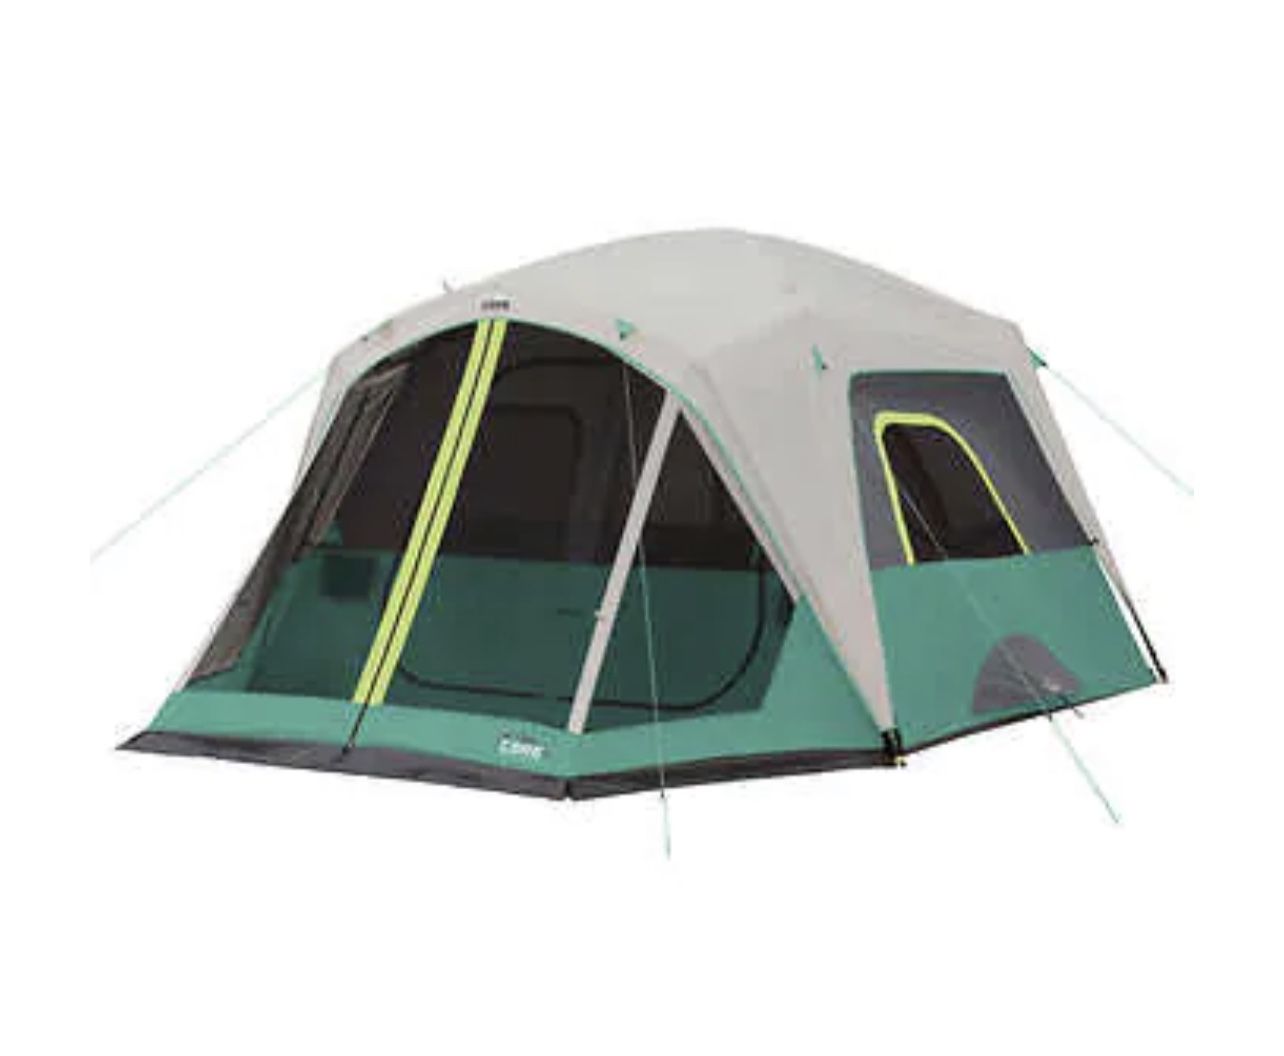 6 Person Straight Wall Cabin Tent With Screen Room 